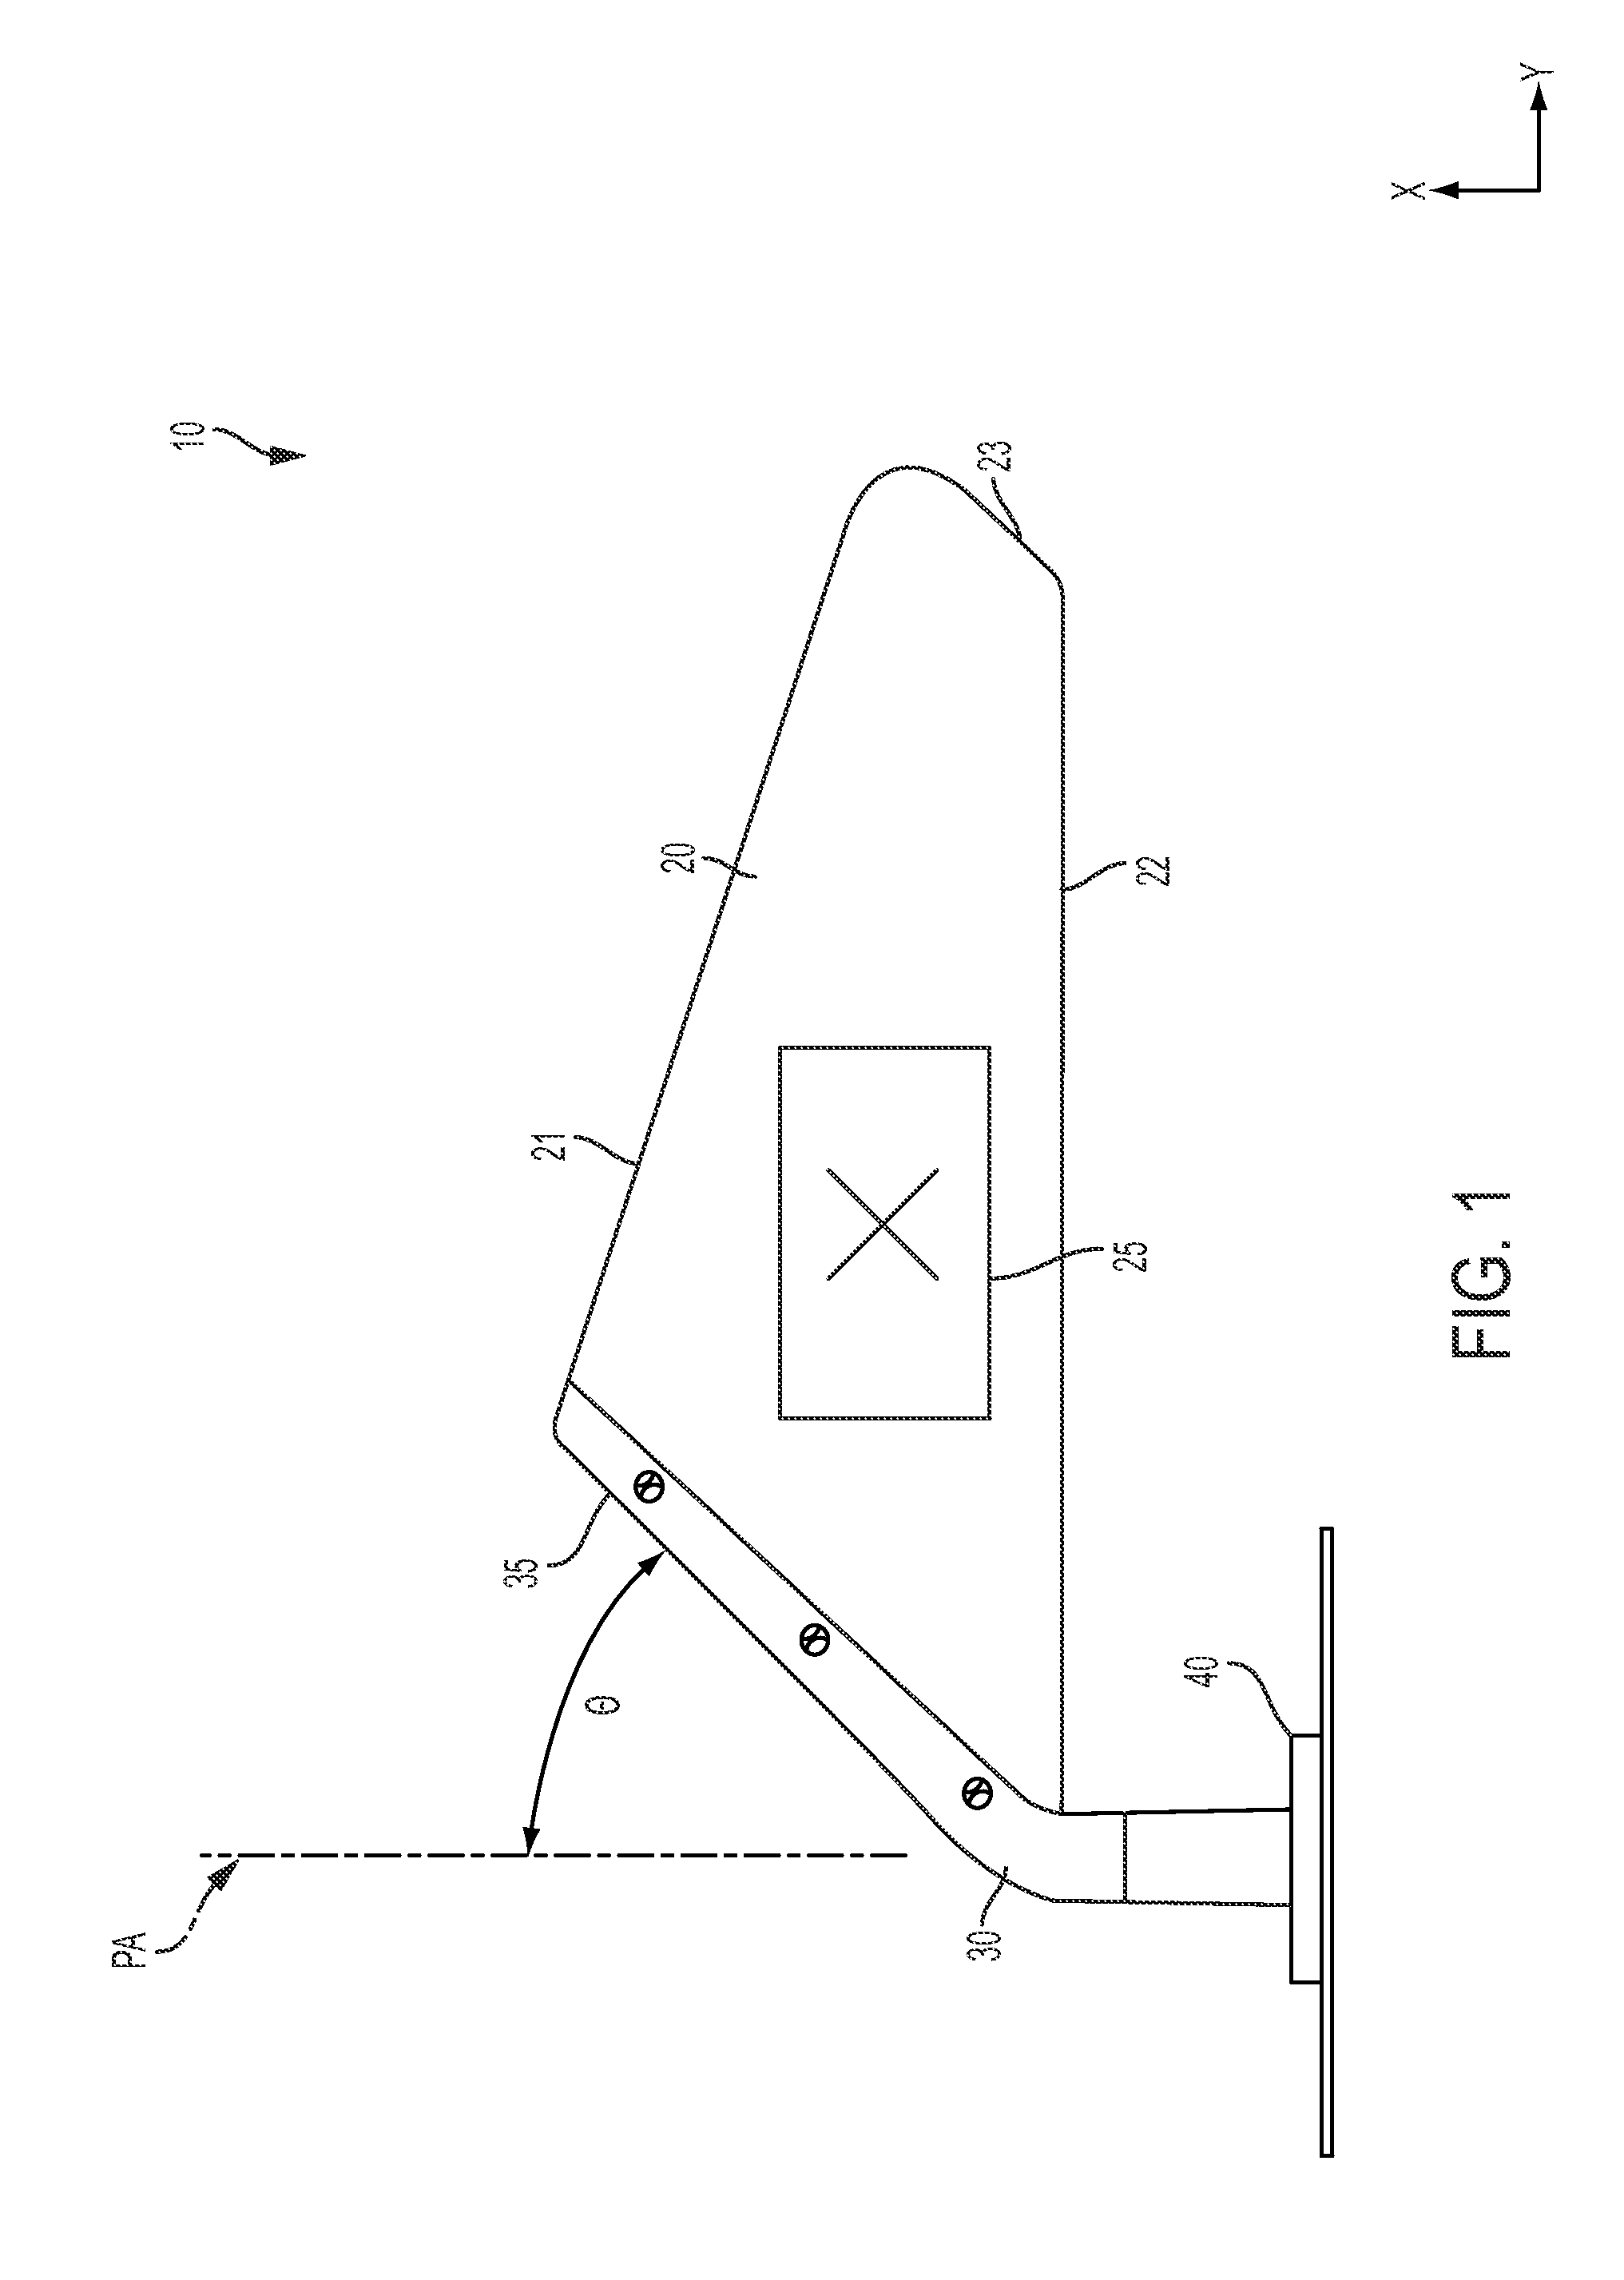 Detachable vehicle-mounted banner assembly having improved display and mounting features